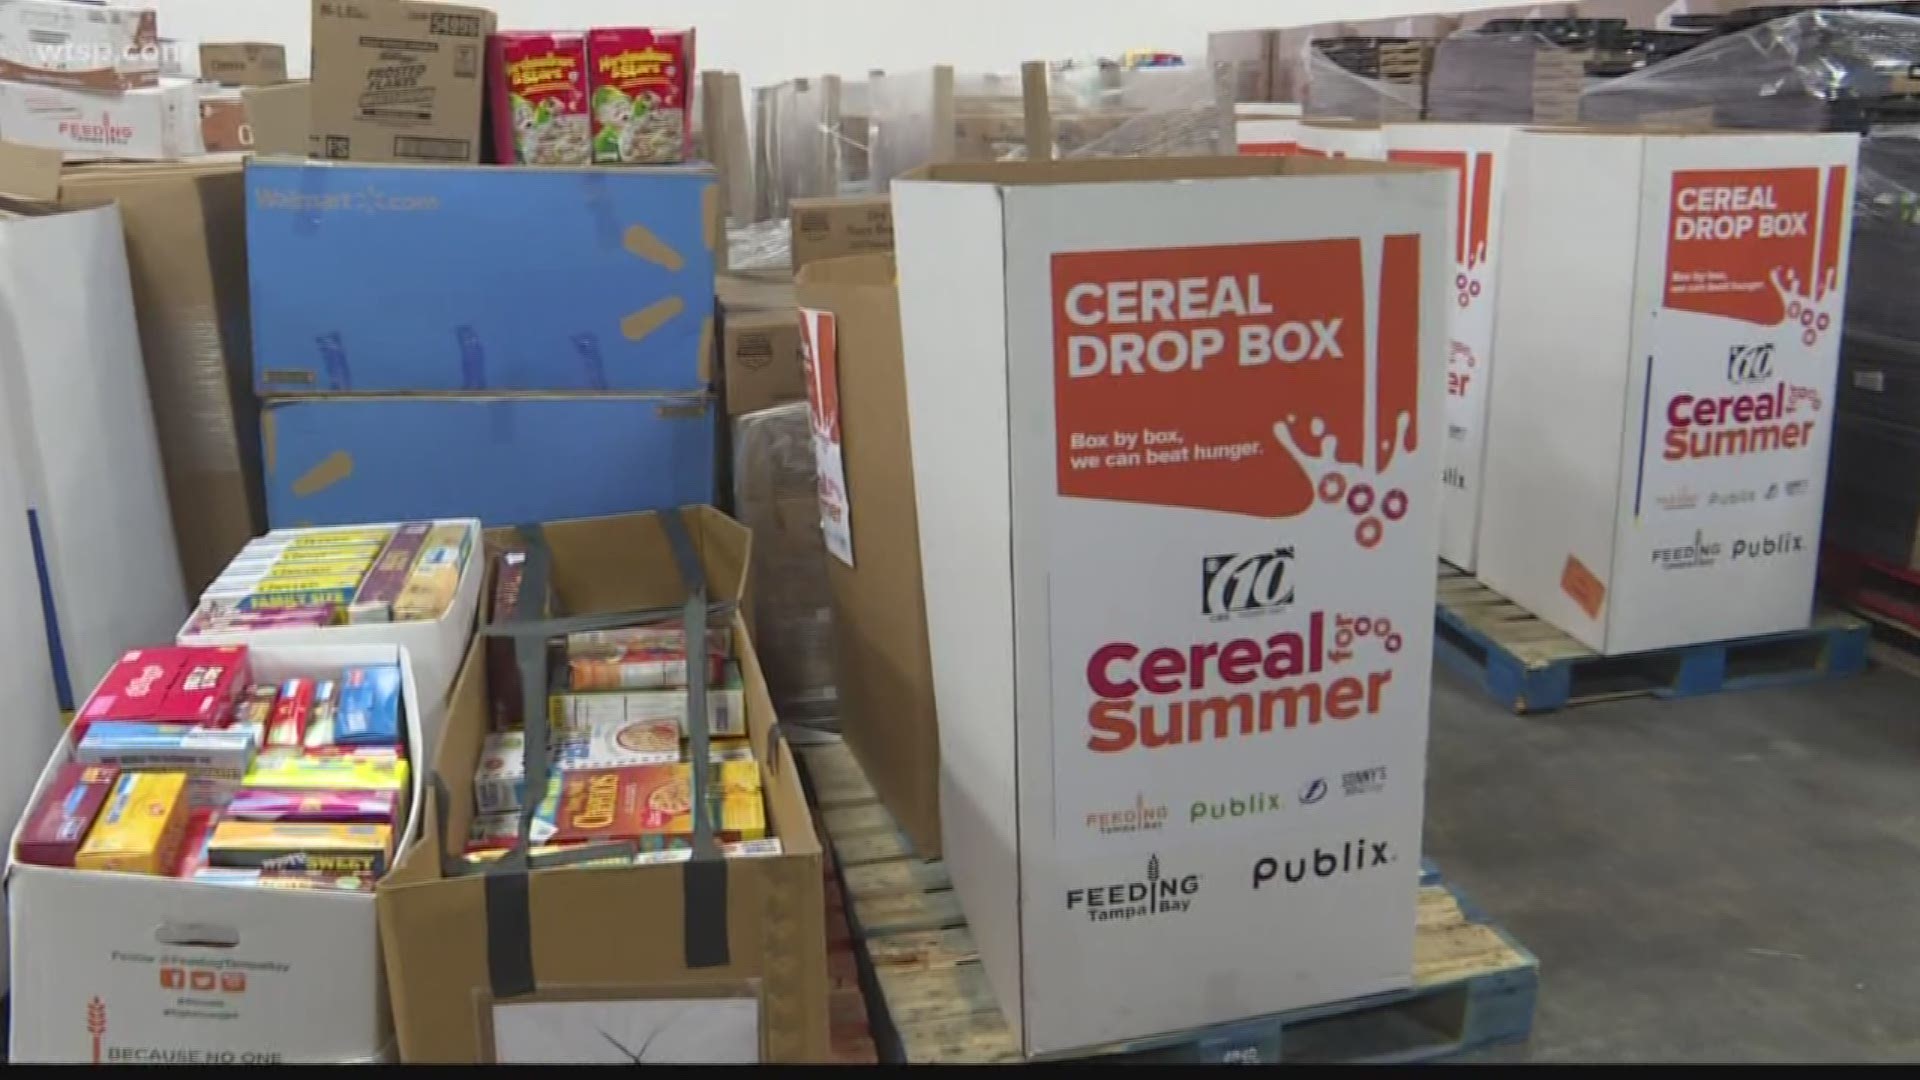 Take a look at all this food: 805,000 meals will be served to the community thanks to your donations to Cereal for Summer. Feeding Tampa Bay will distribute the cereal to food pantries in a 10-county area.